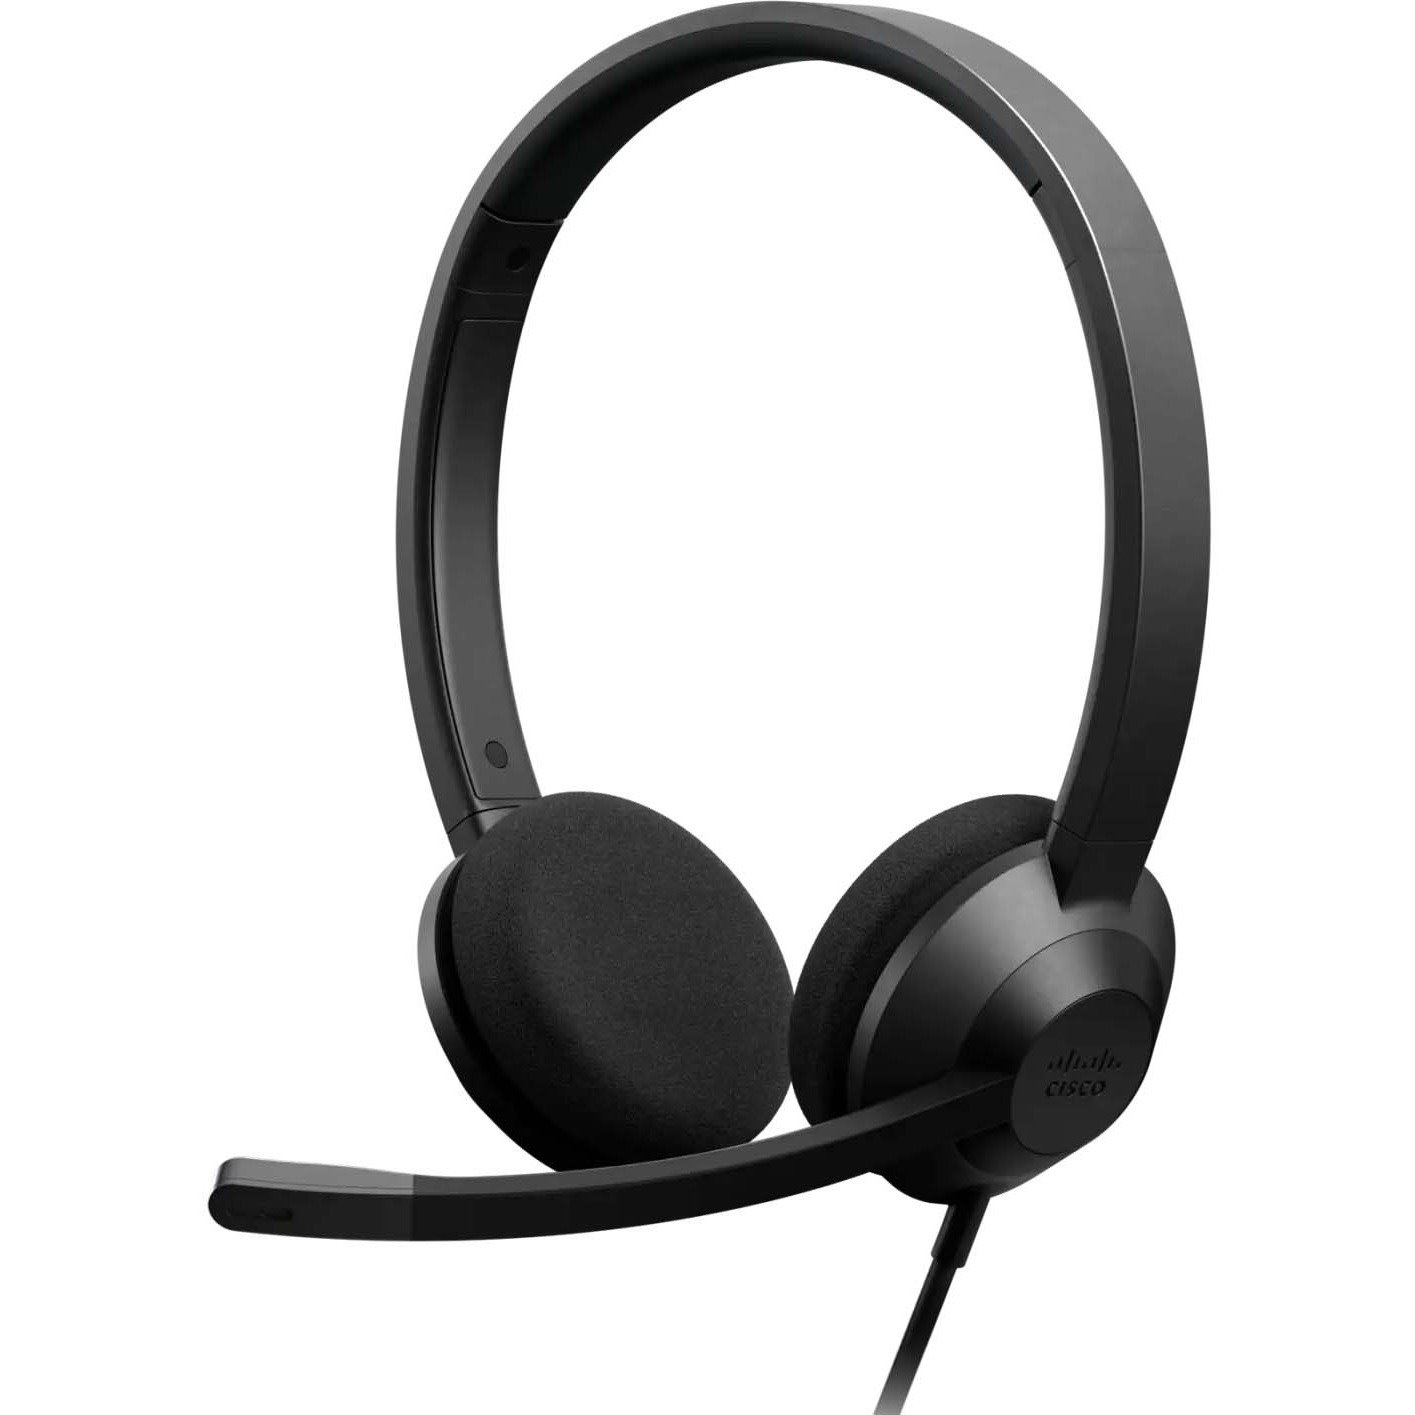 Cisco 321 Wired On-ear Stereo Headset - Carbon Black